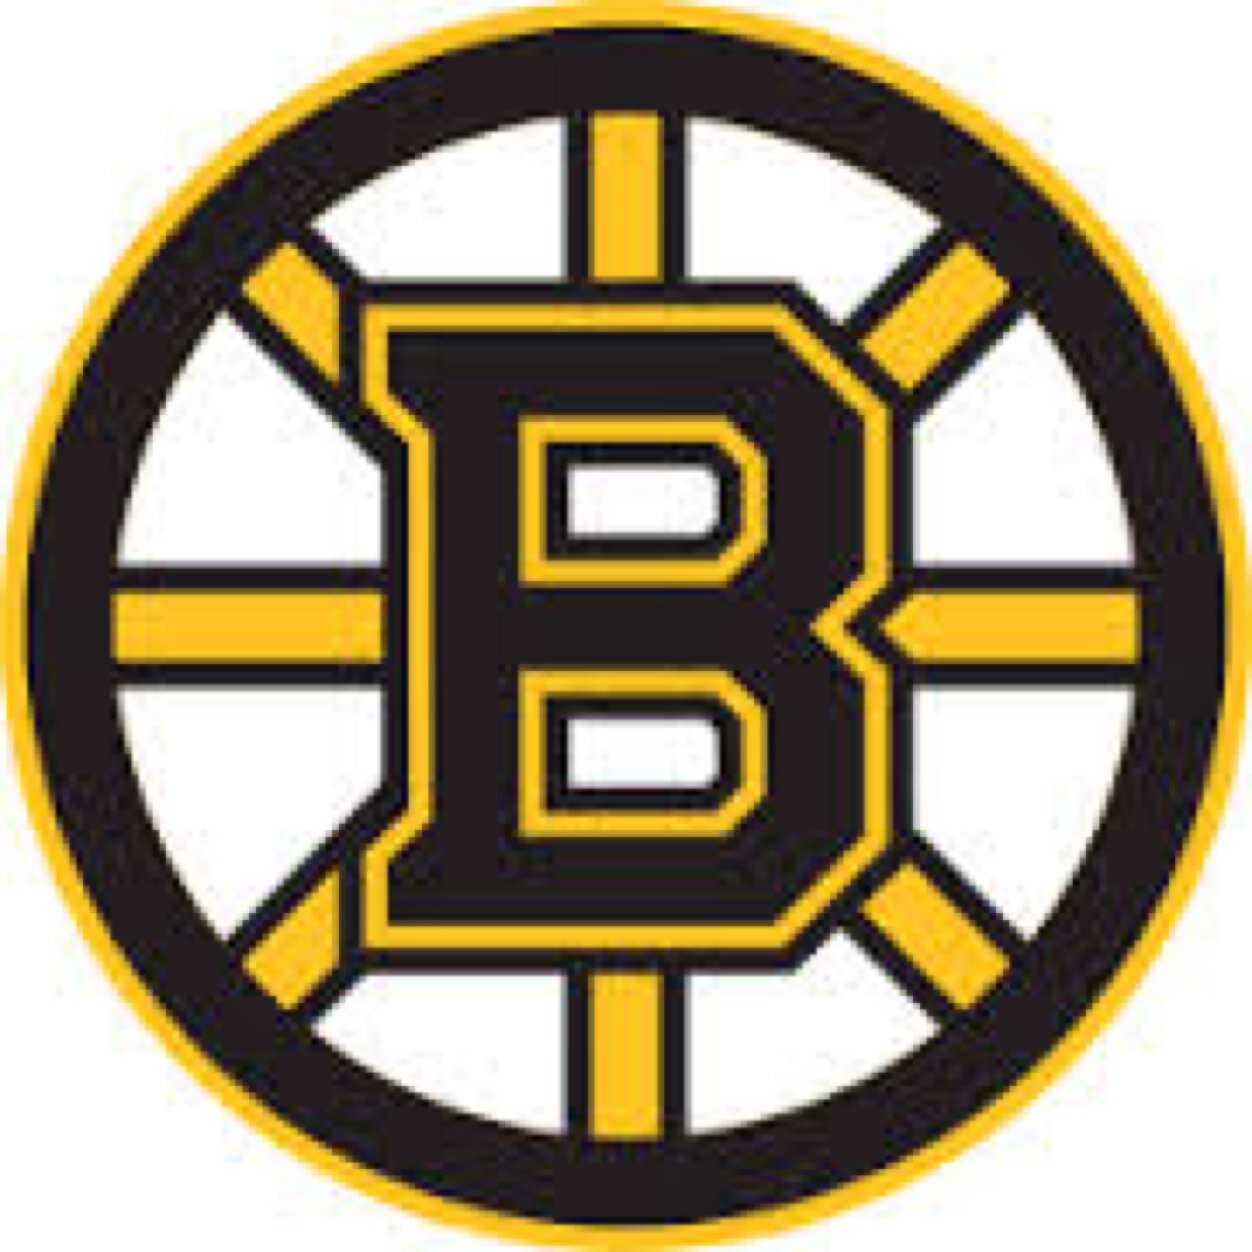 Official Twitter of the | NHL 15 | EA Sports Boston Bruins. (Not Affiliated with @NHLBruins). #NHLBruins